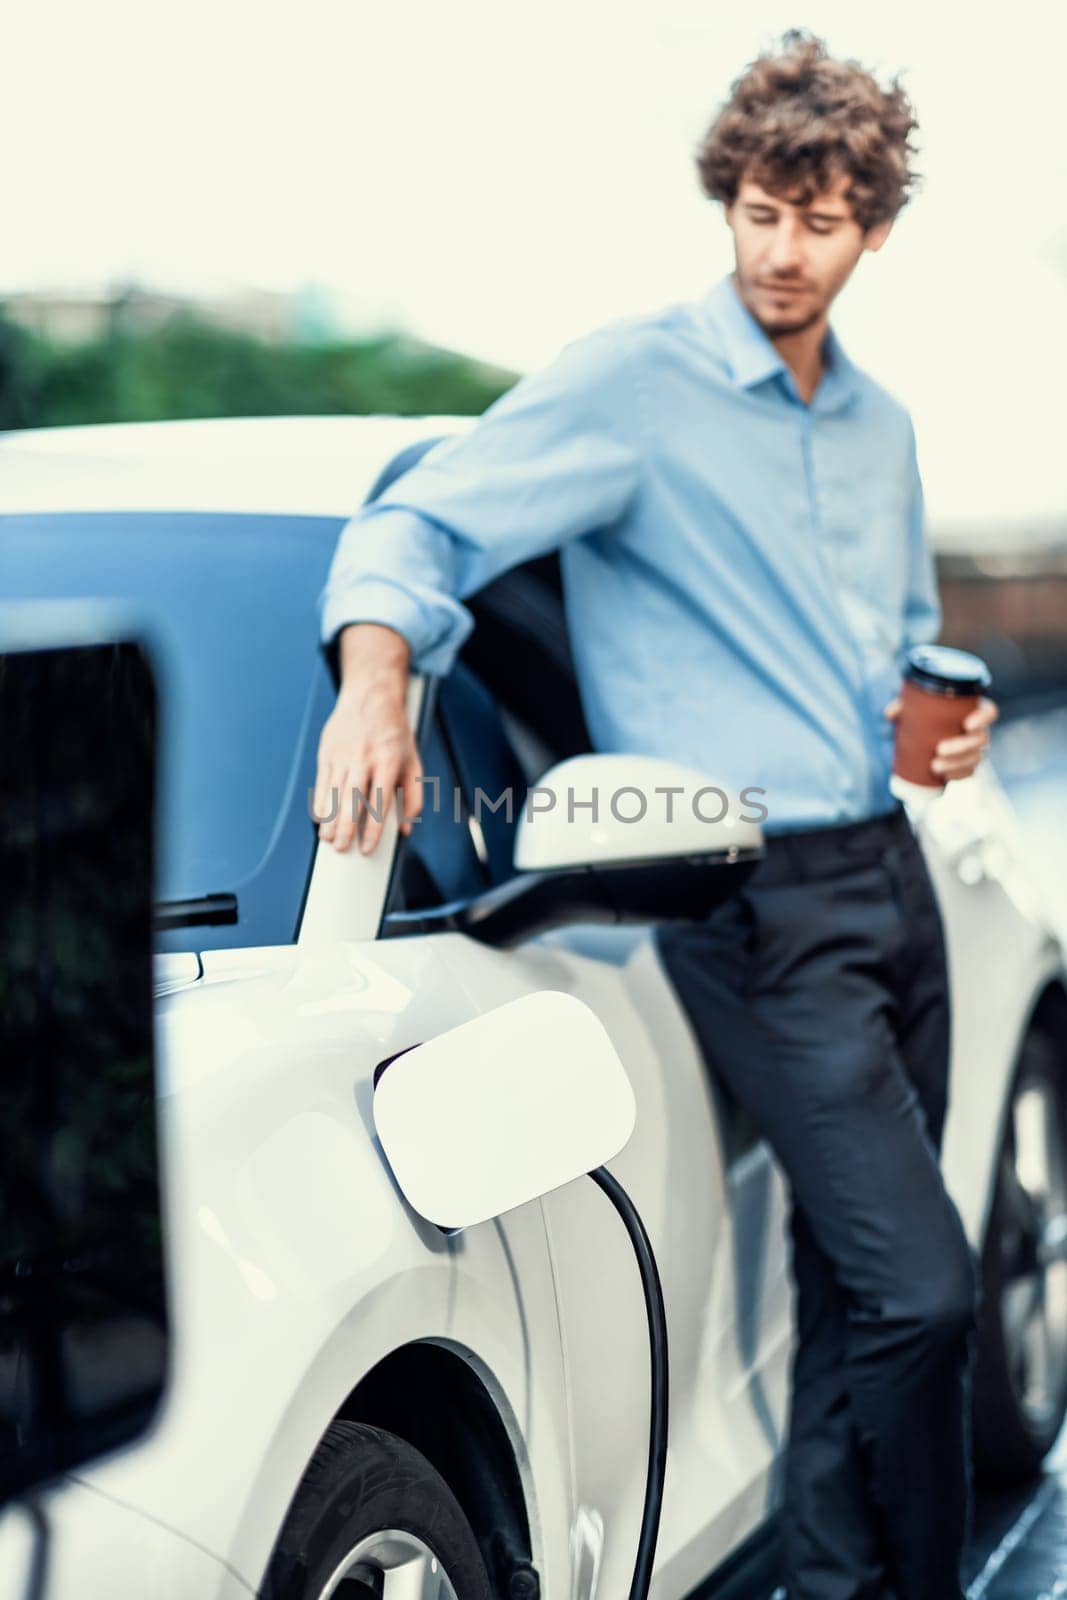 Progressive concept of focus EV car at charging station with blur man background by biancoblue